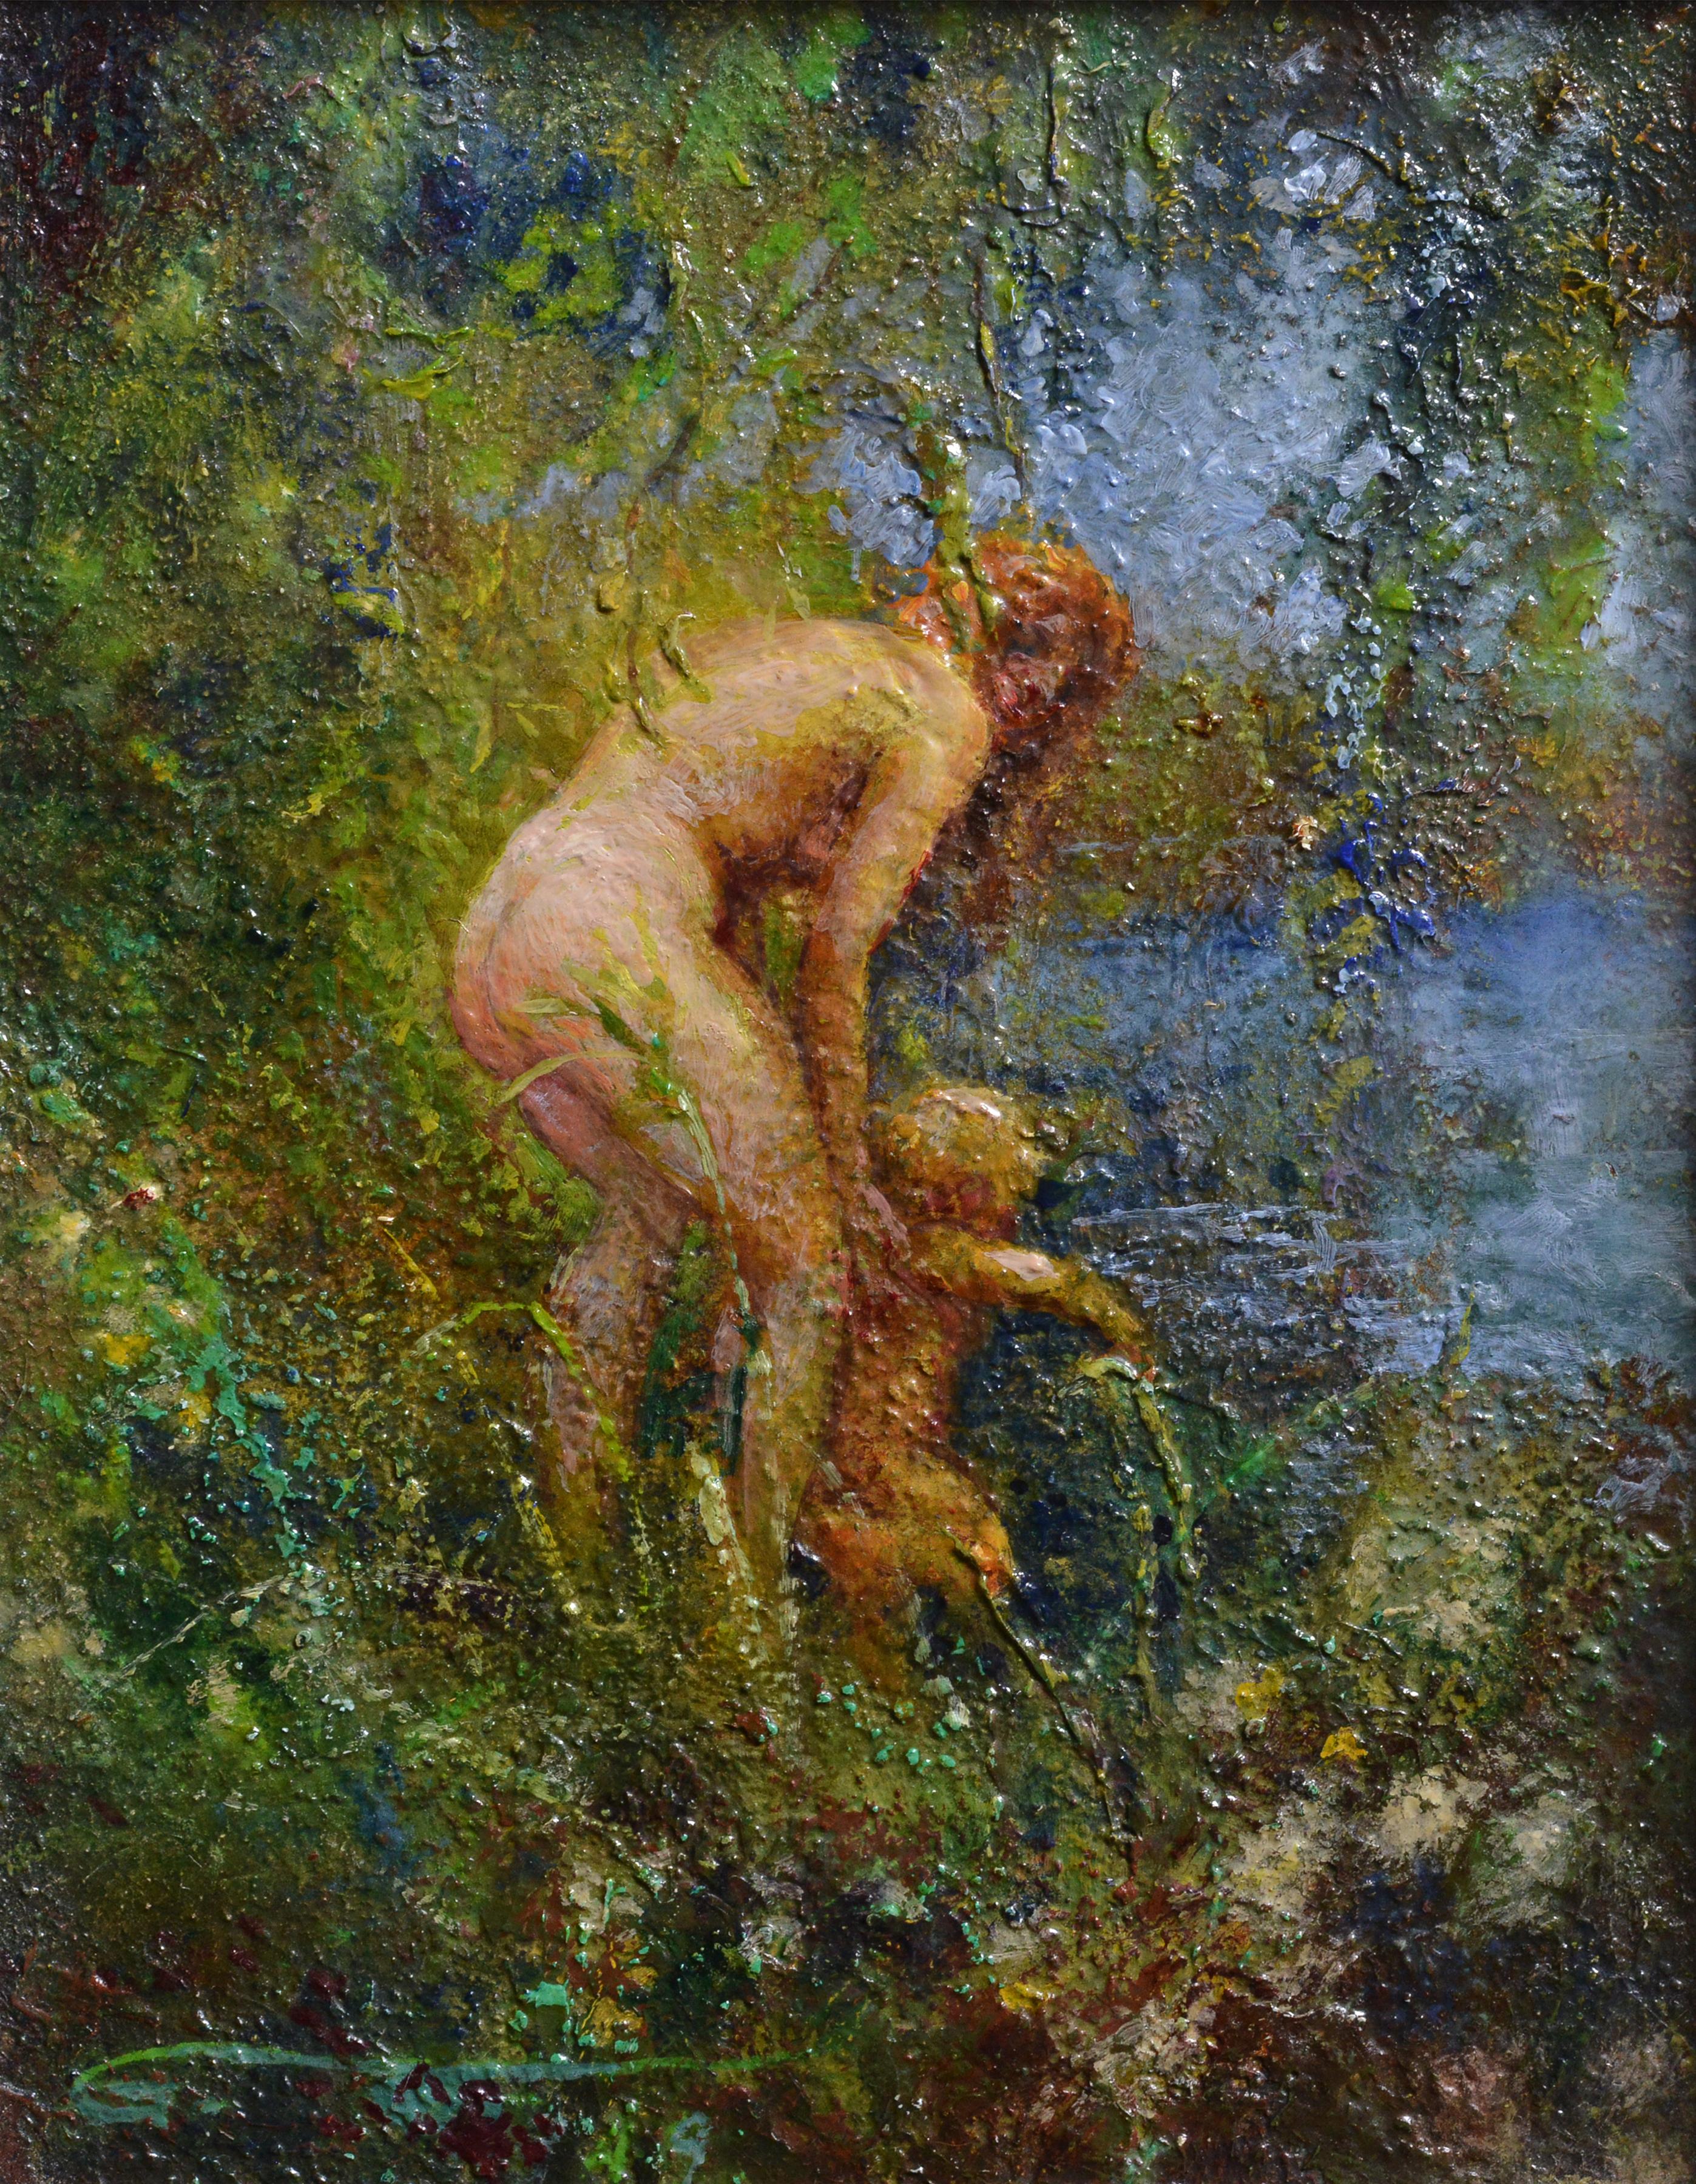 Woman Bathes Child in River ca 1932 Oil Painting by Swedish Master Widholm - Brown Figurative Painting by Ernst Gunnar Widholm